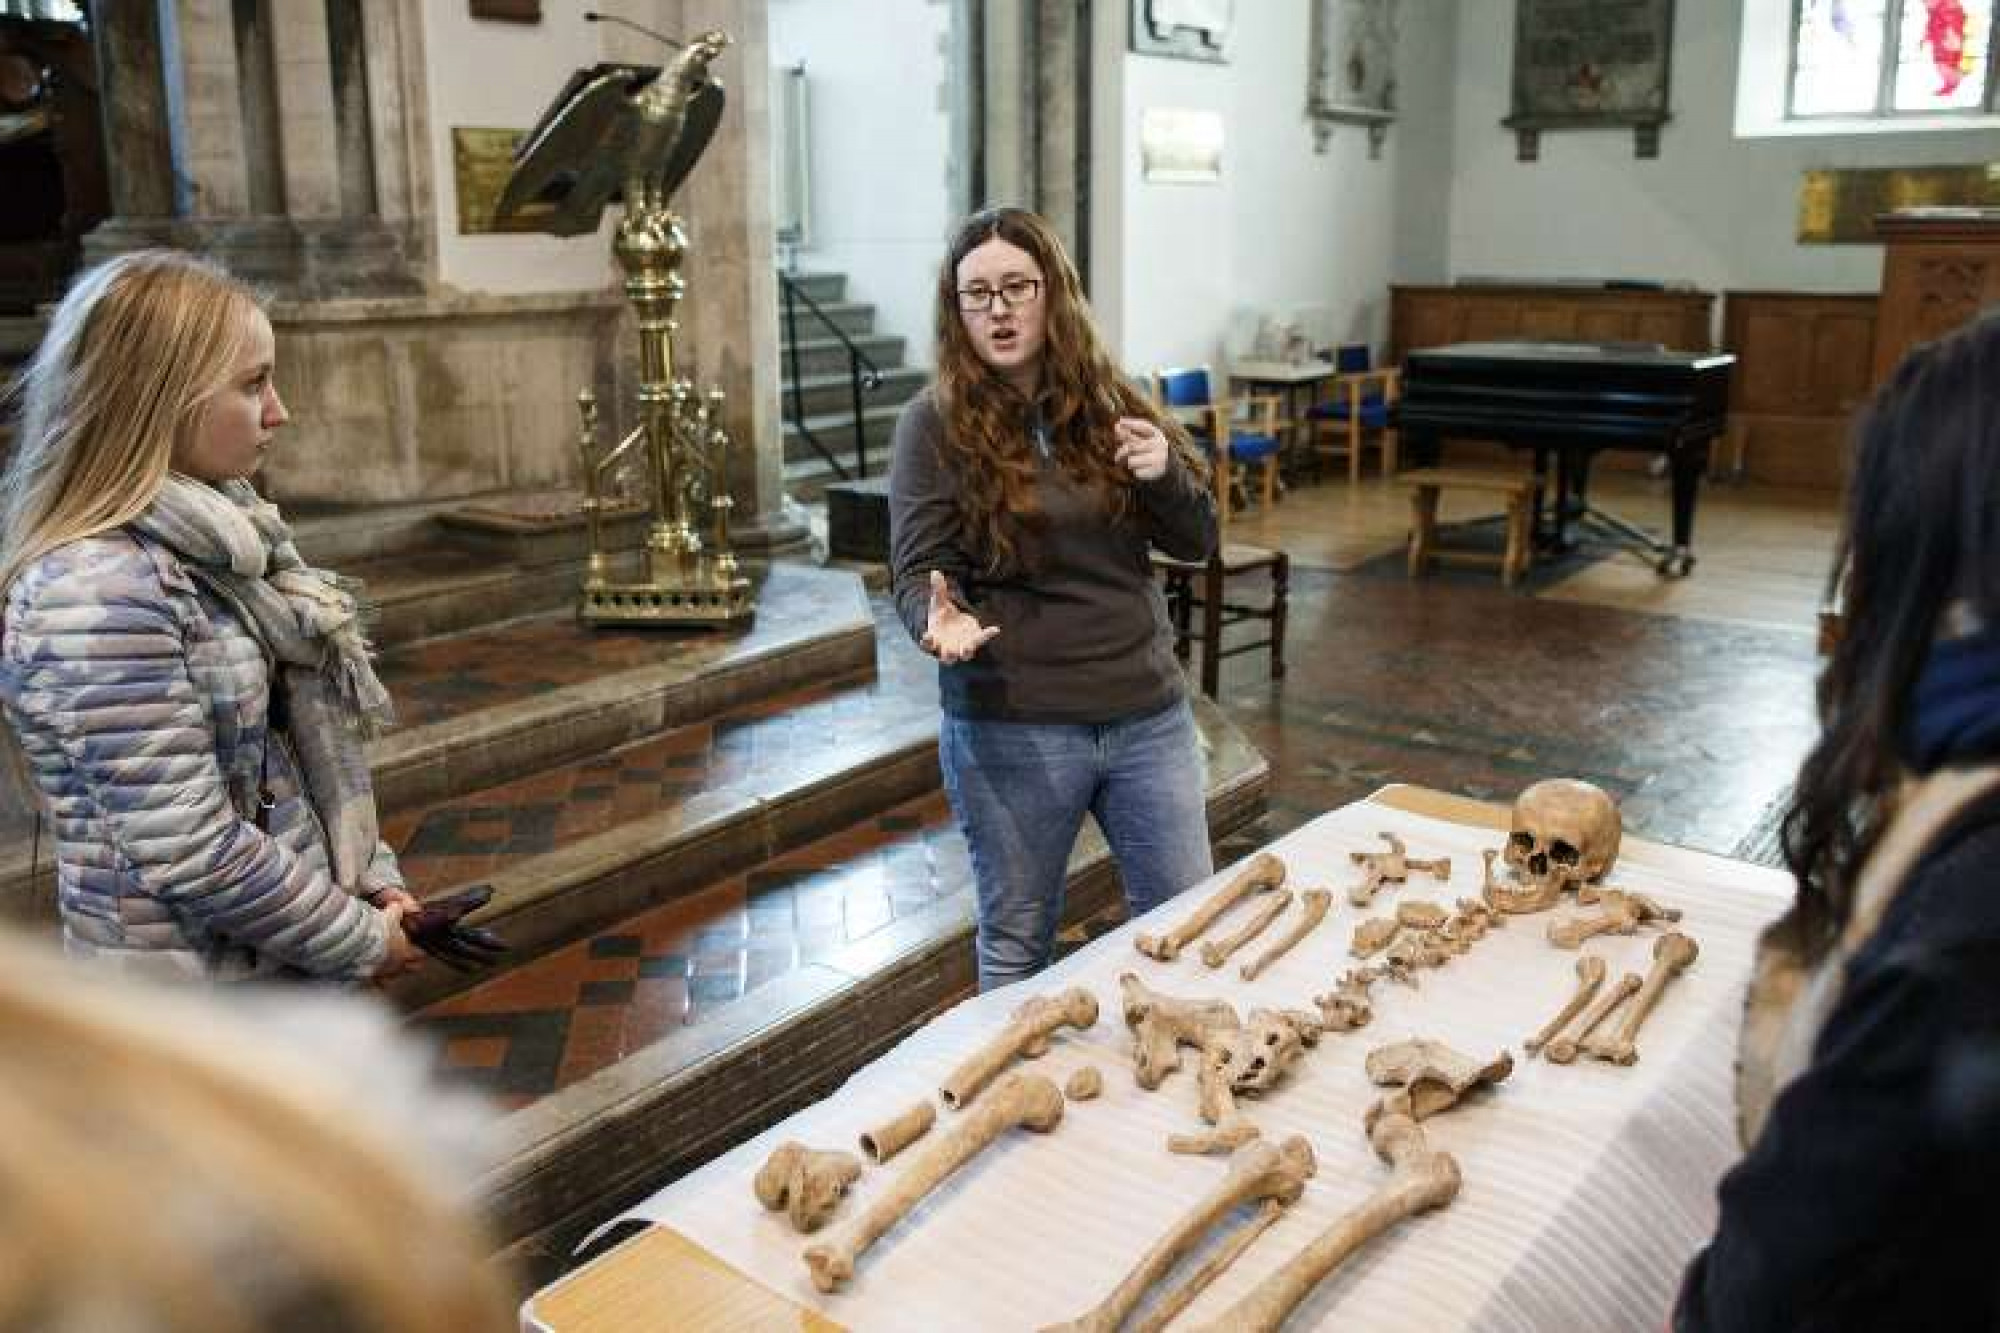 Expert showing ancient human skeleton to student group